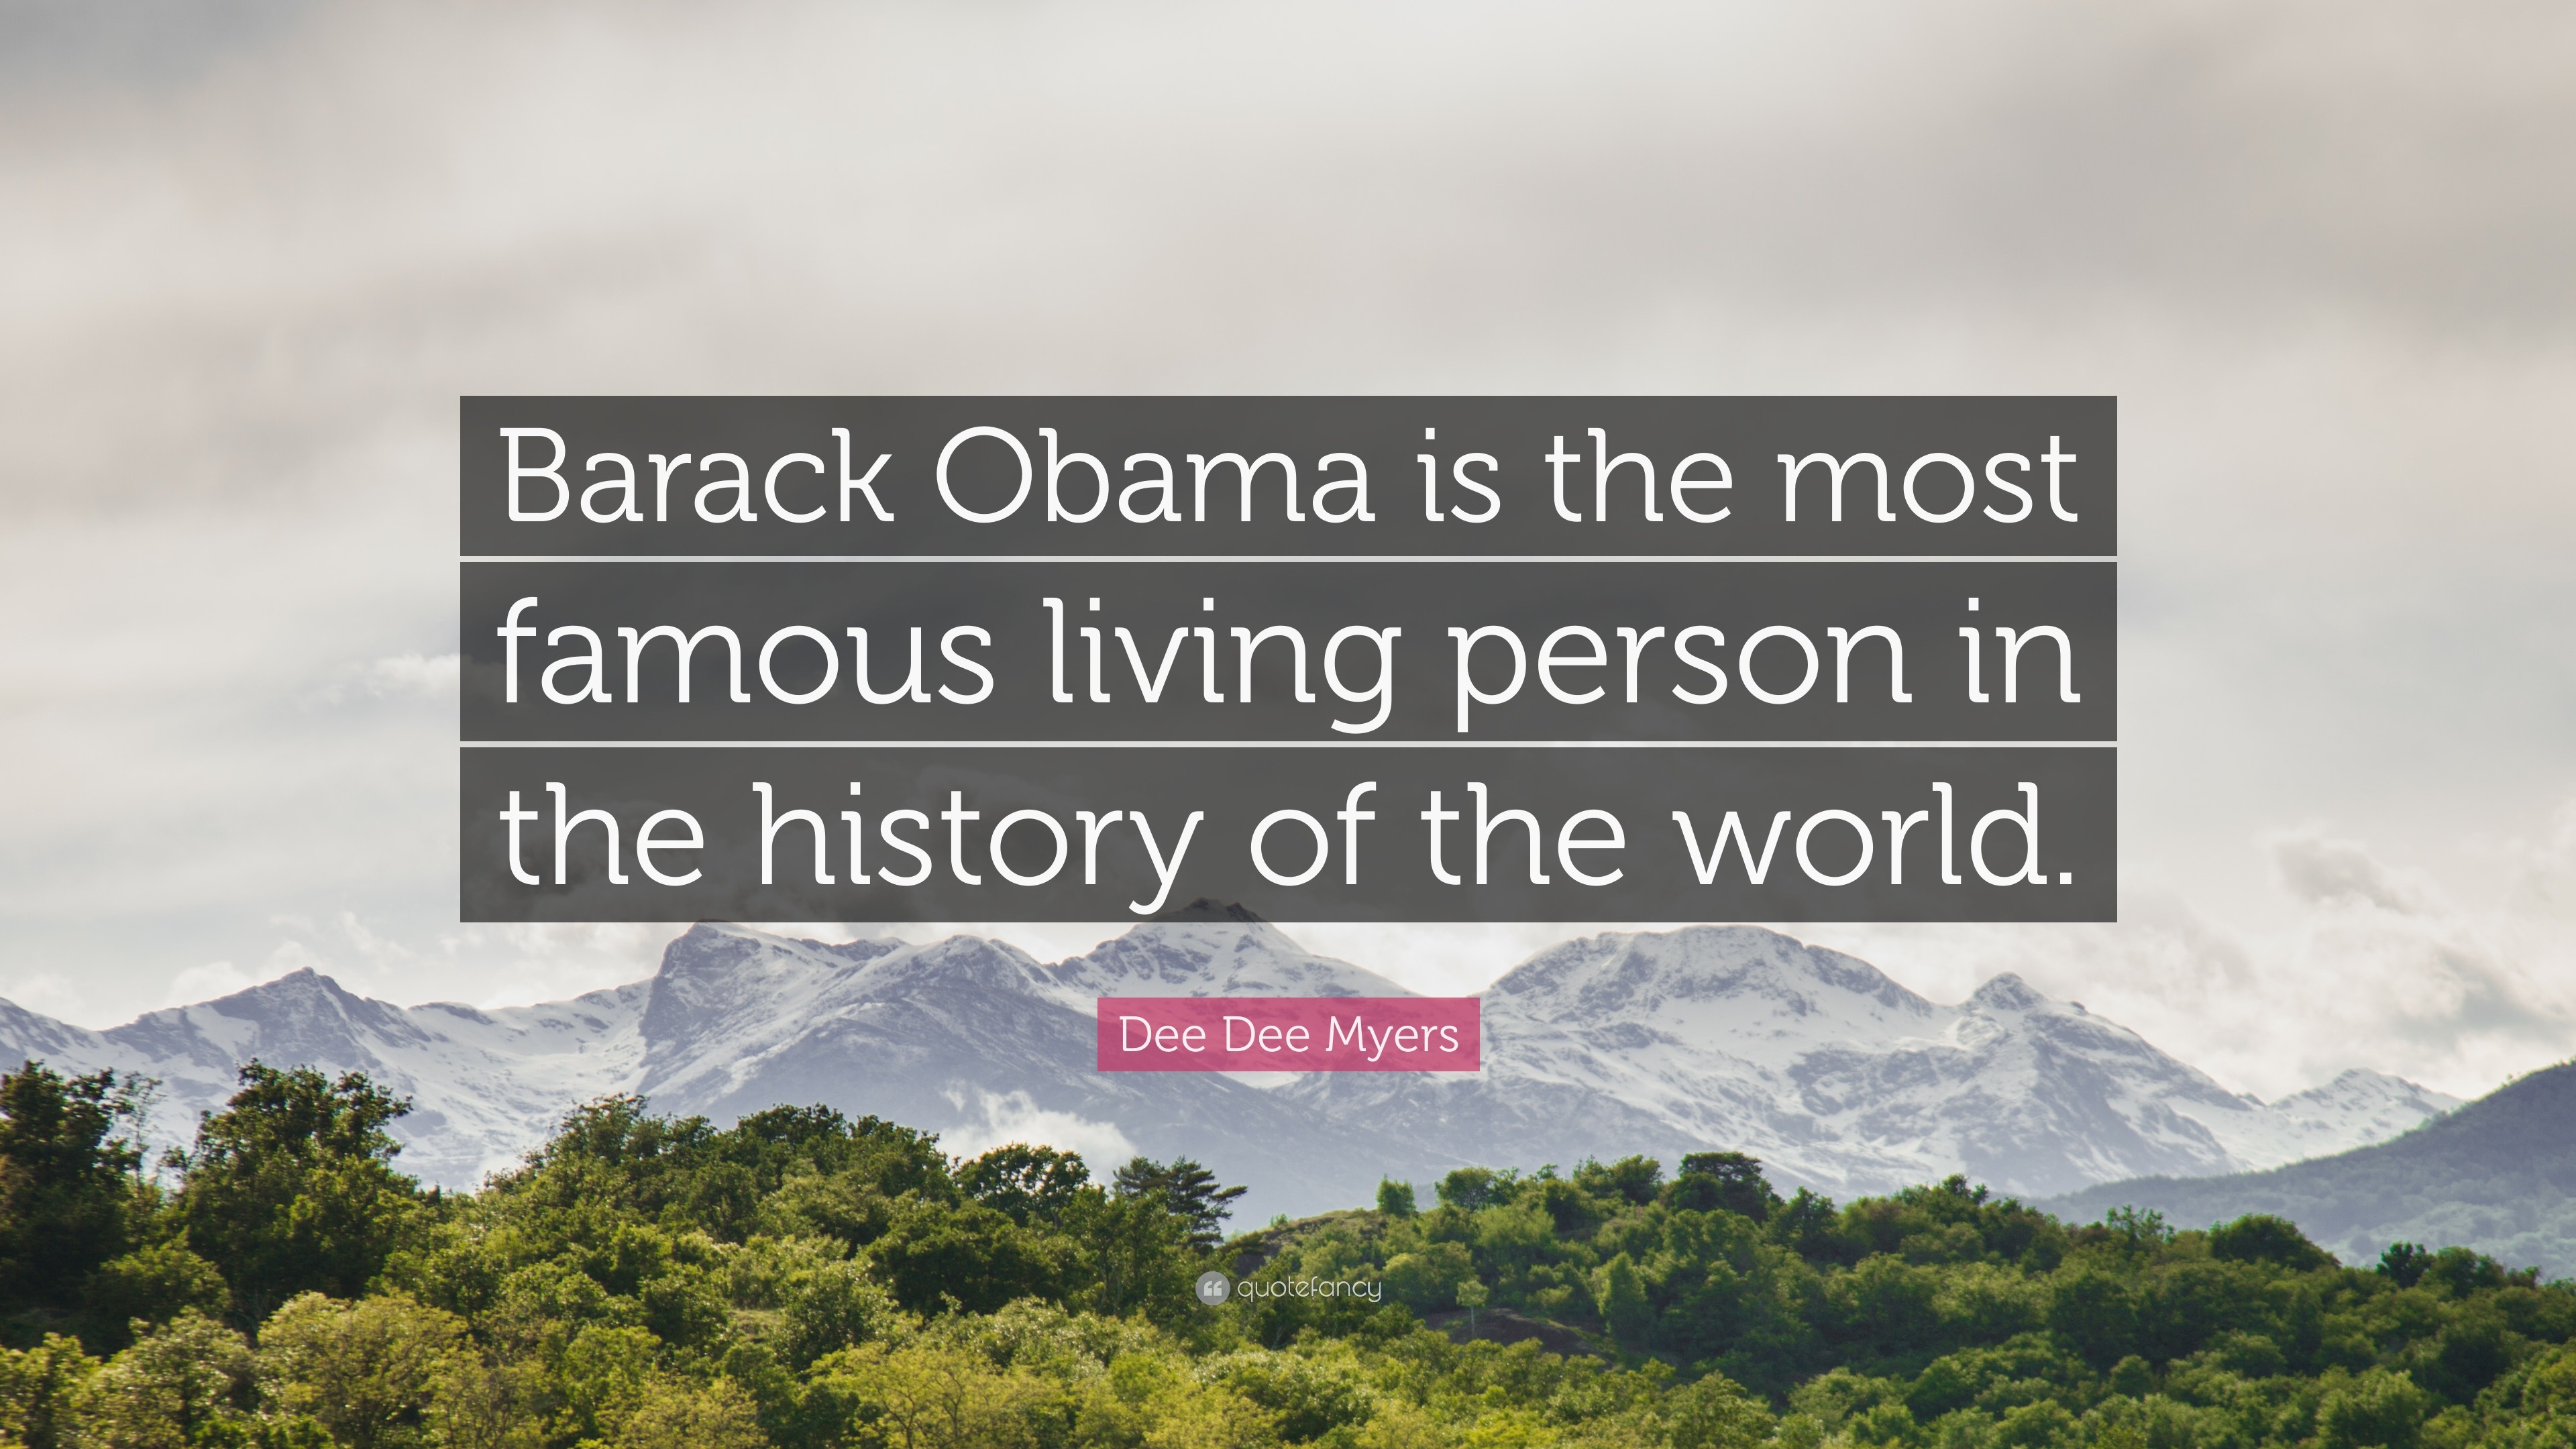 Is Obama the Most Famous Living Person Ever?